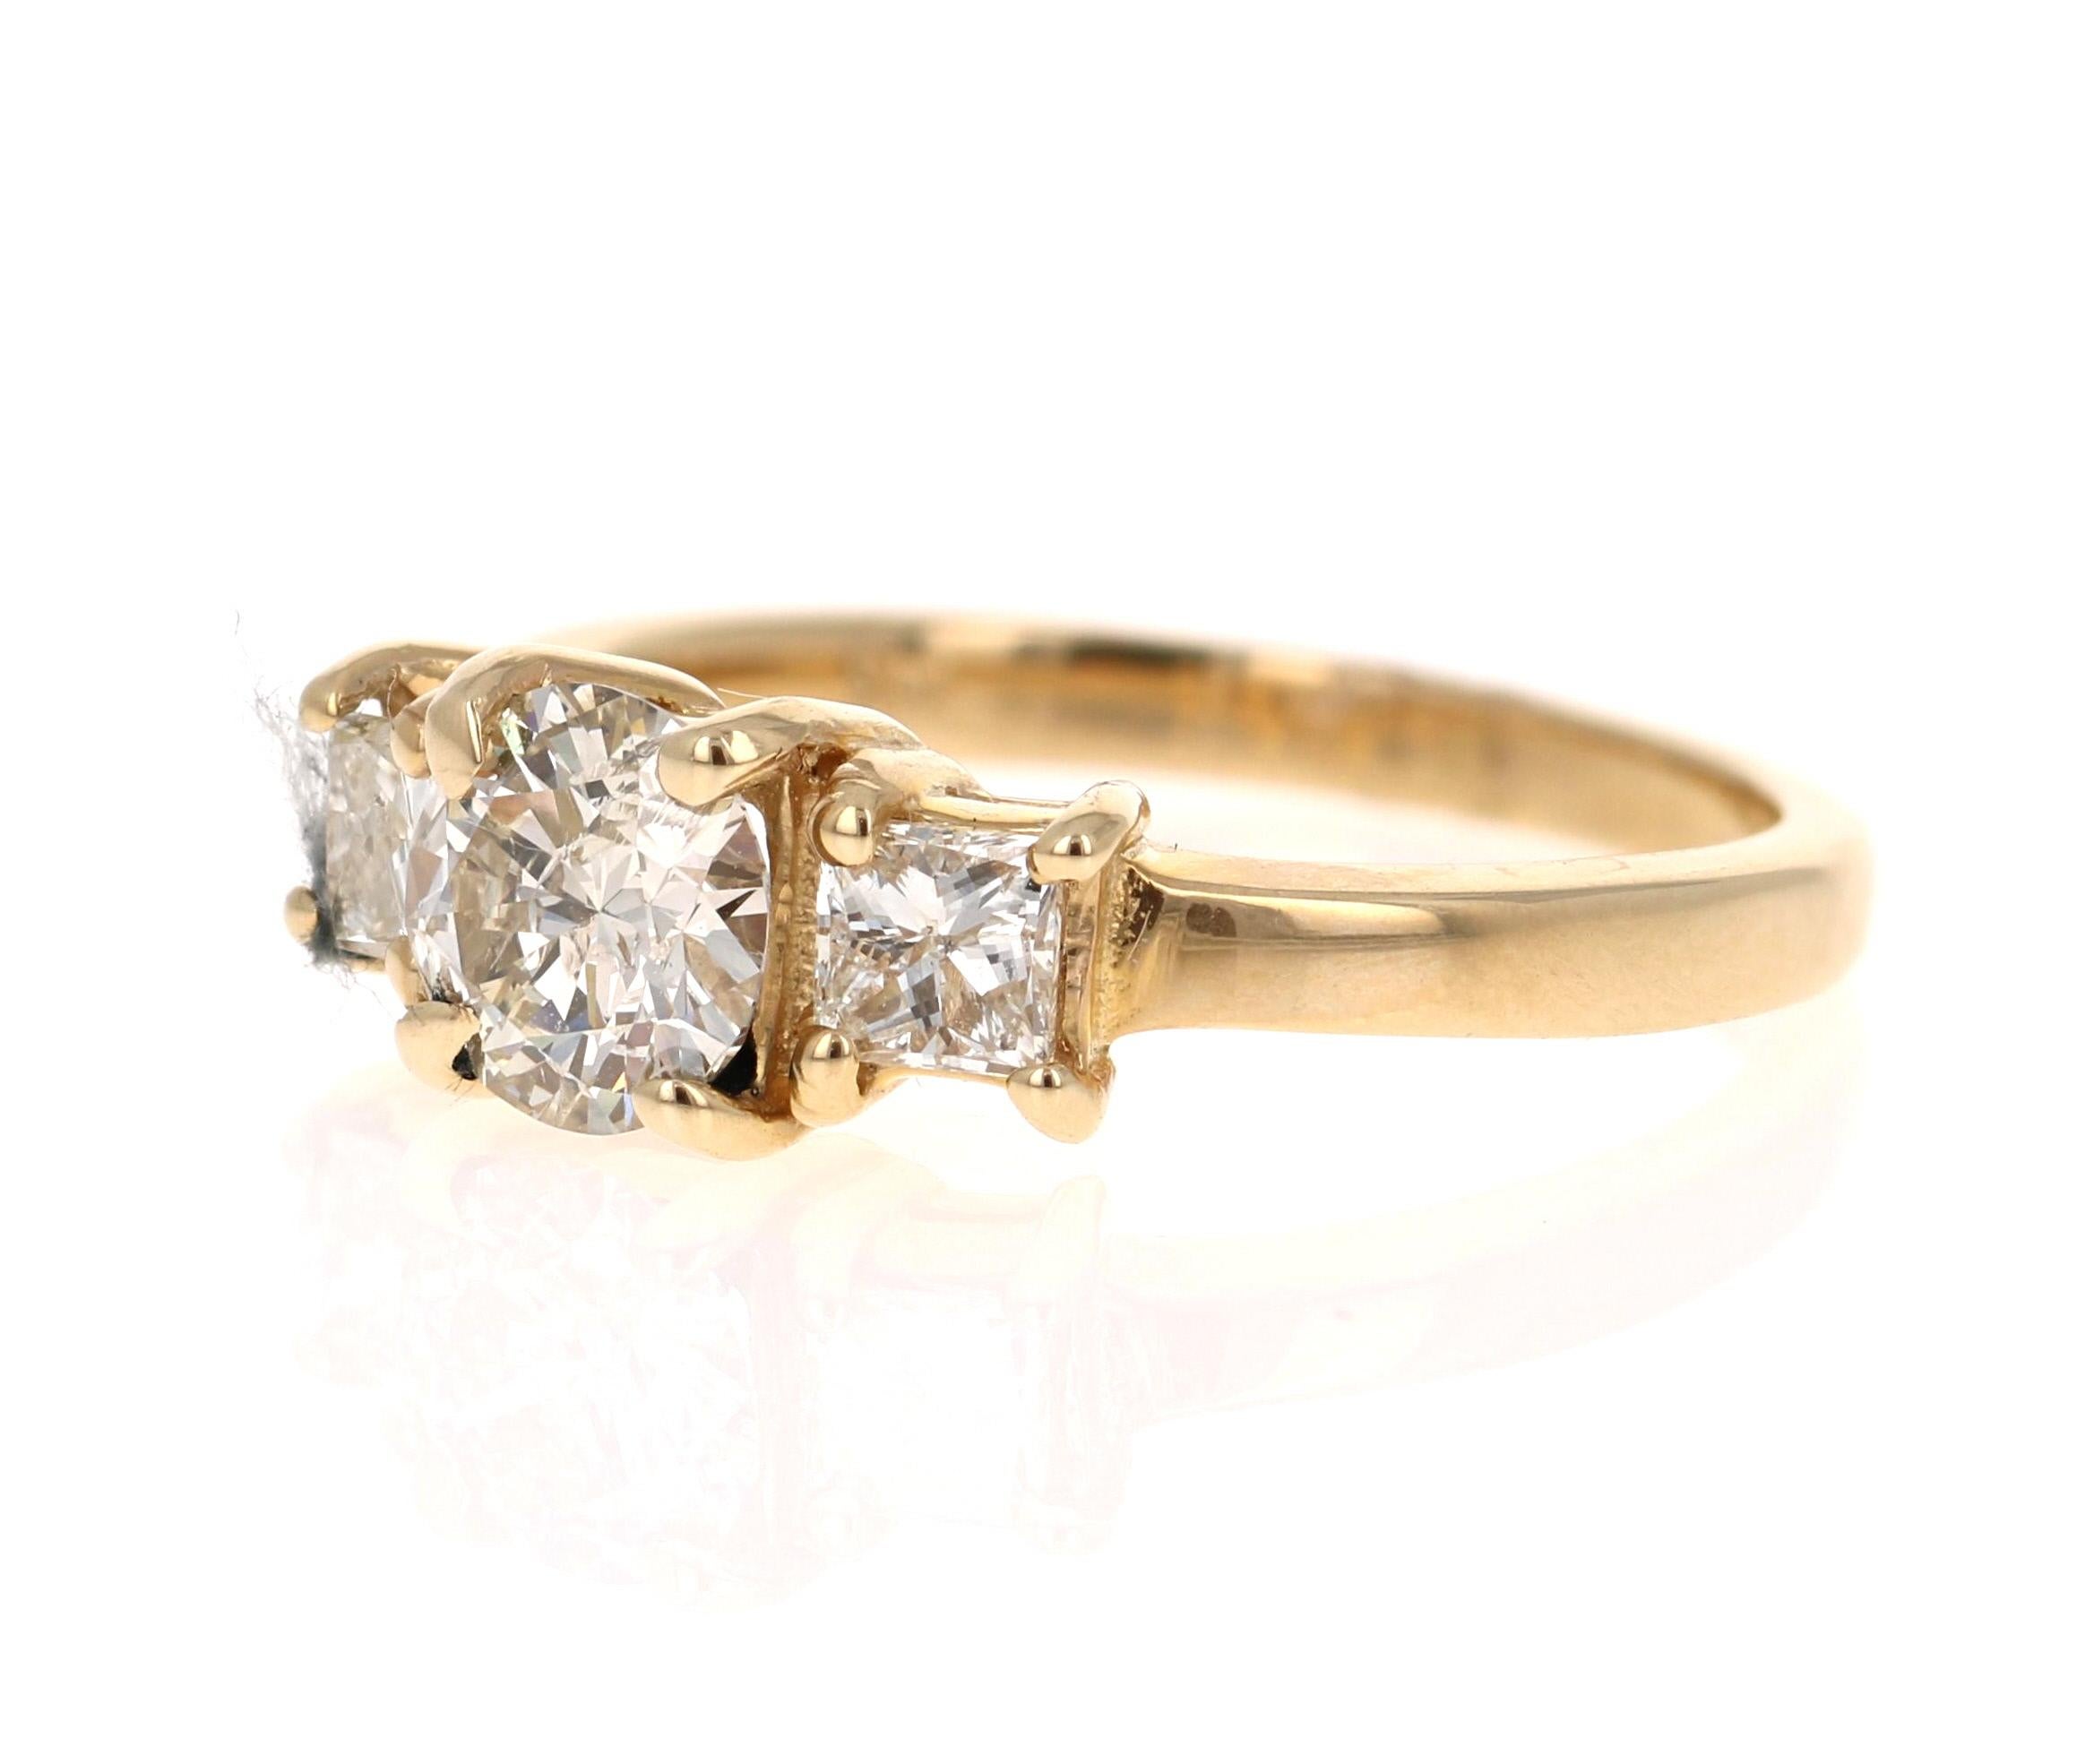 A classic and sparkly 3-stone Diamond ring set in 14 Karat Yellow Gold.

There is a Round Cut Diamond in the center which weighs 0.76 Carats and it has 2 Princess Cut Diamonds that weighs 0.46 Carats. The total Carat Weight of the ring is 1.22